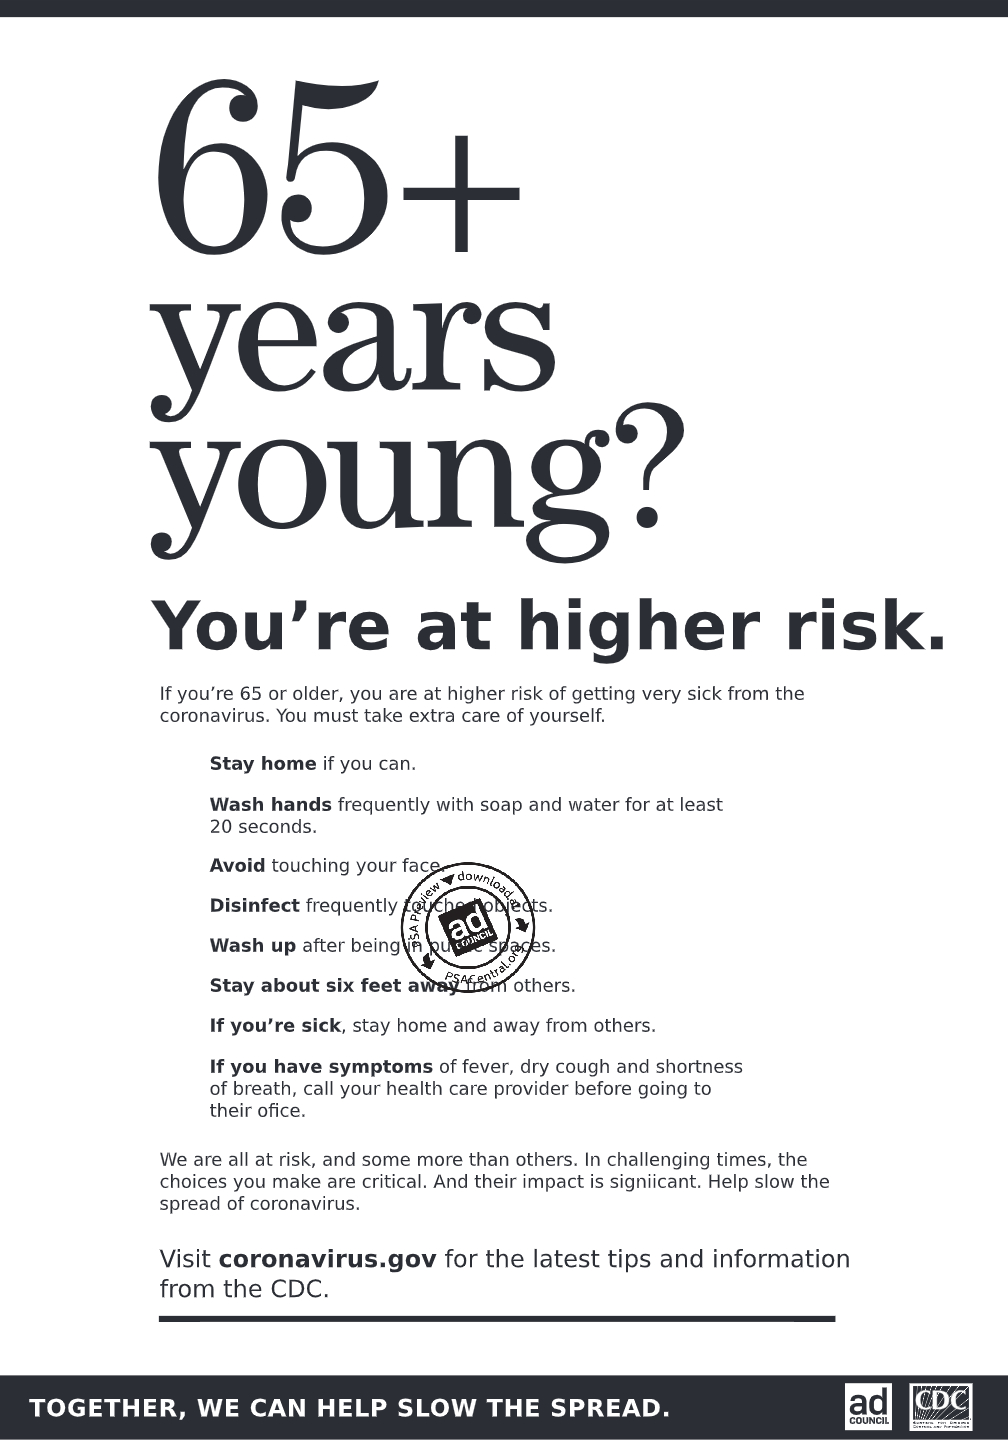 65+ years young? You're at higher risk